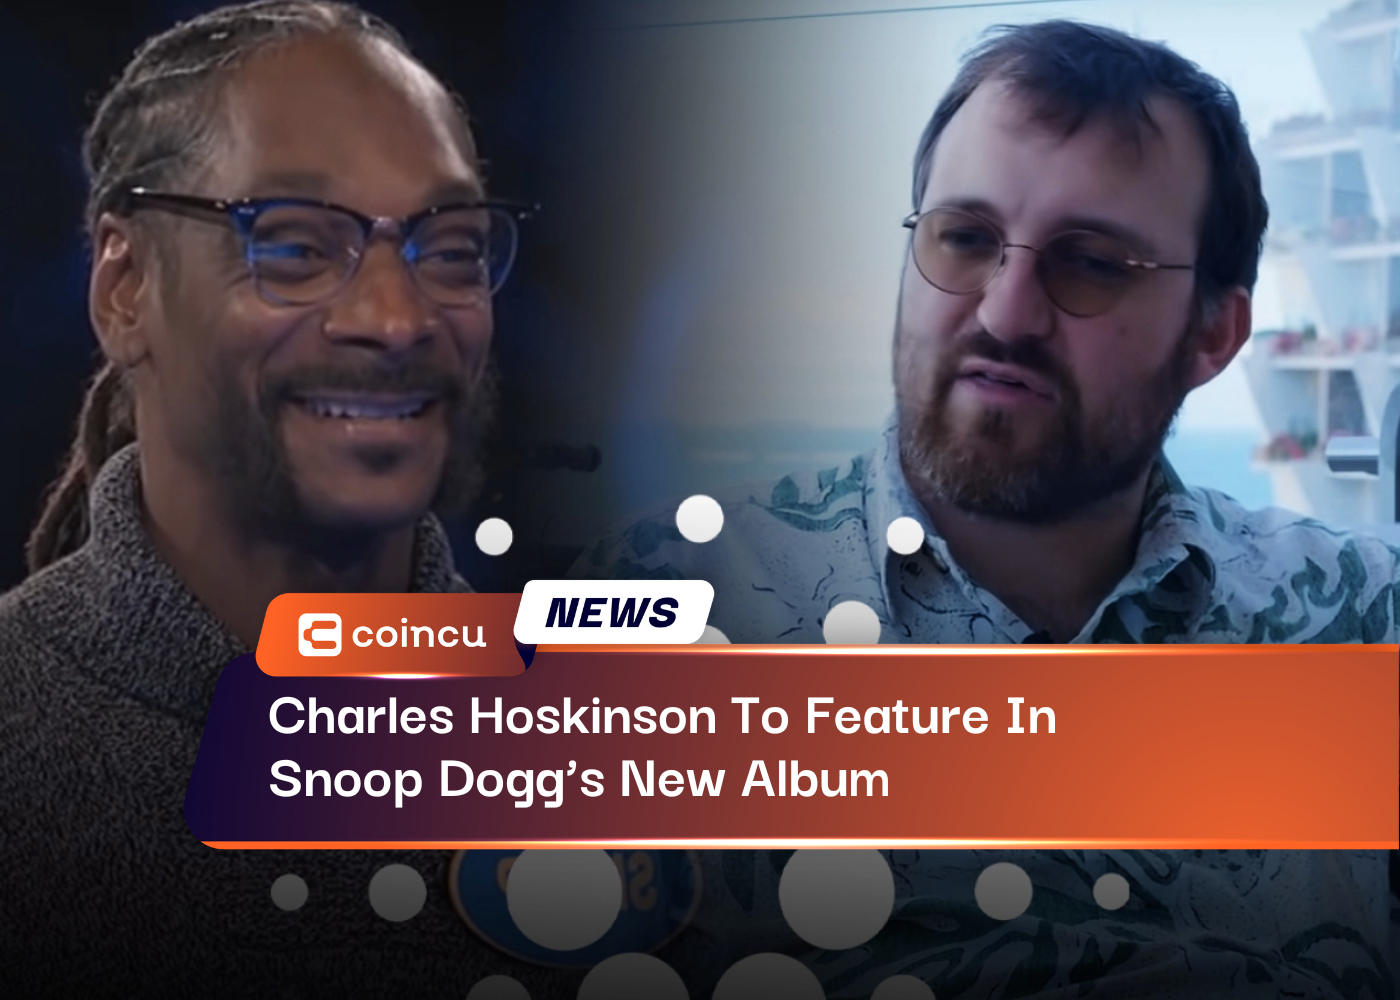 Charles Hoskinson To Feature In Snoop Dogg’s New Album